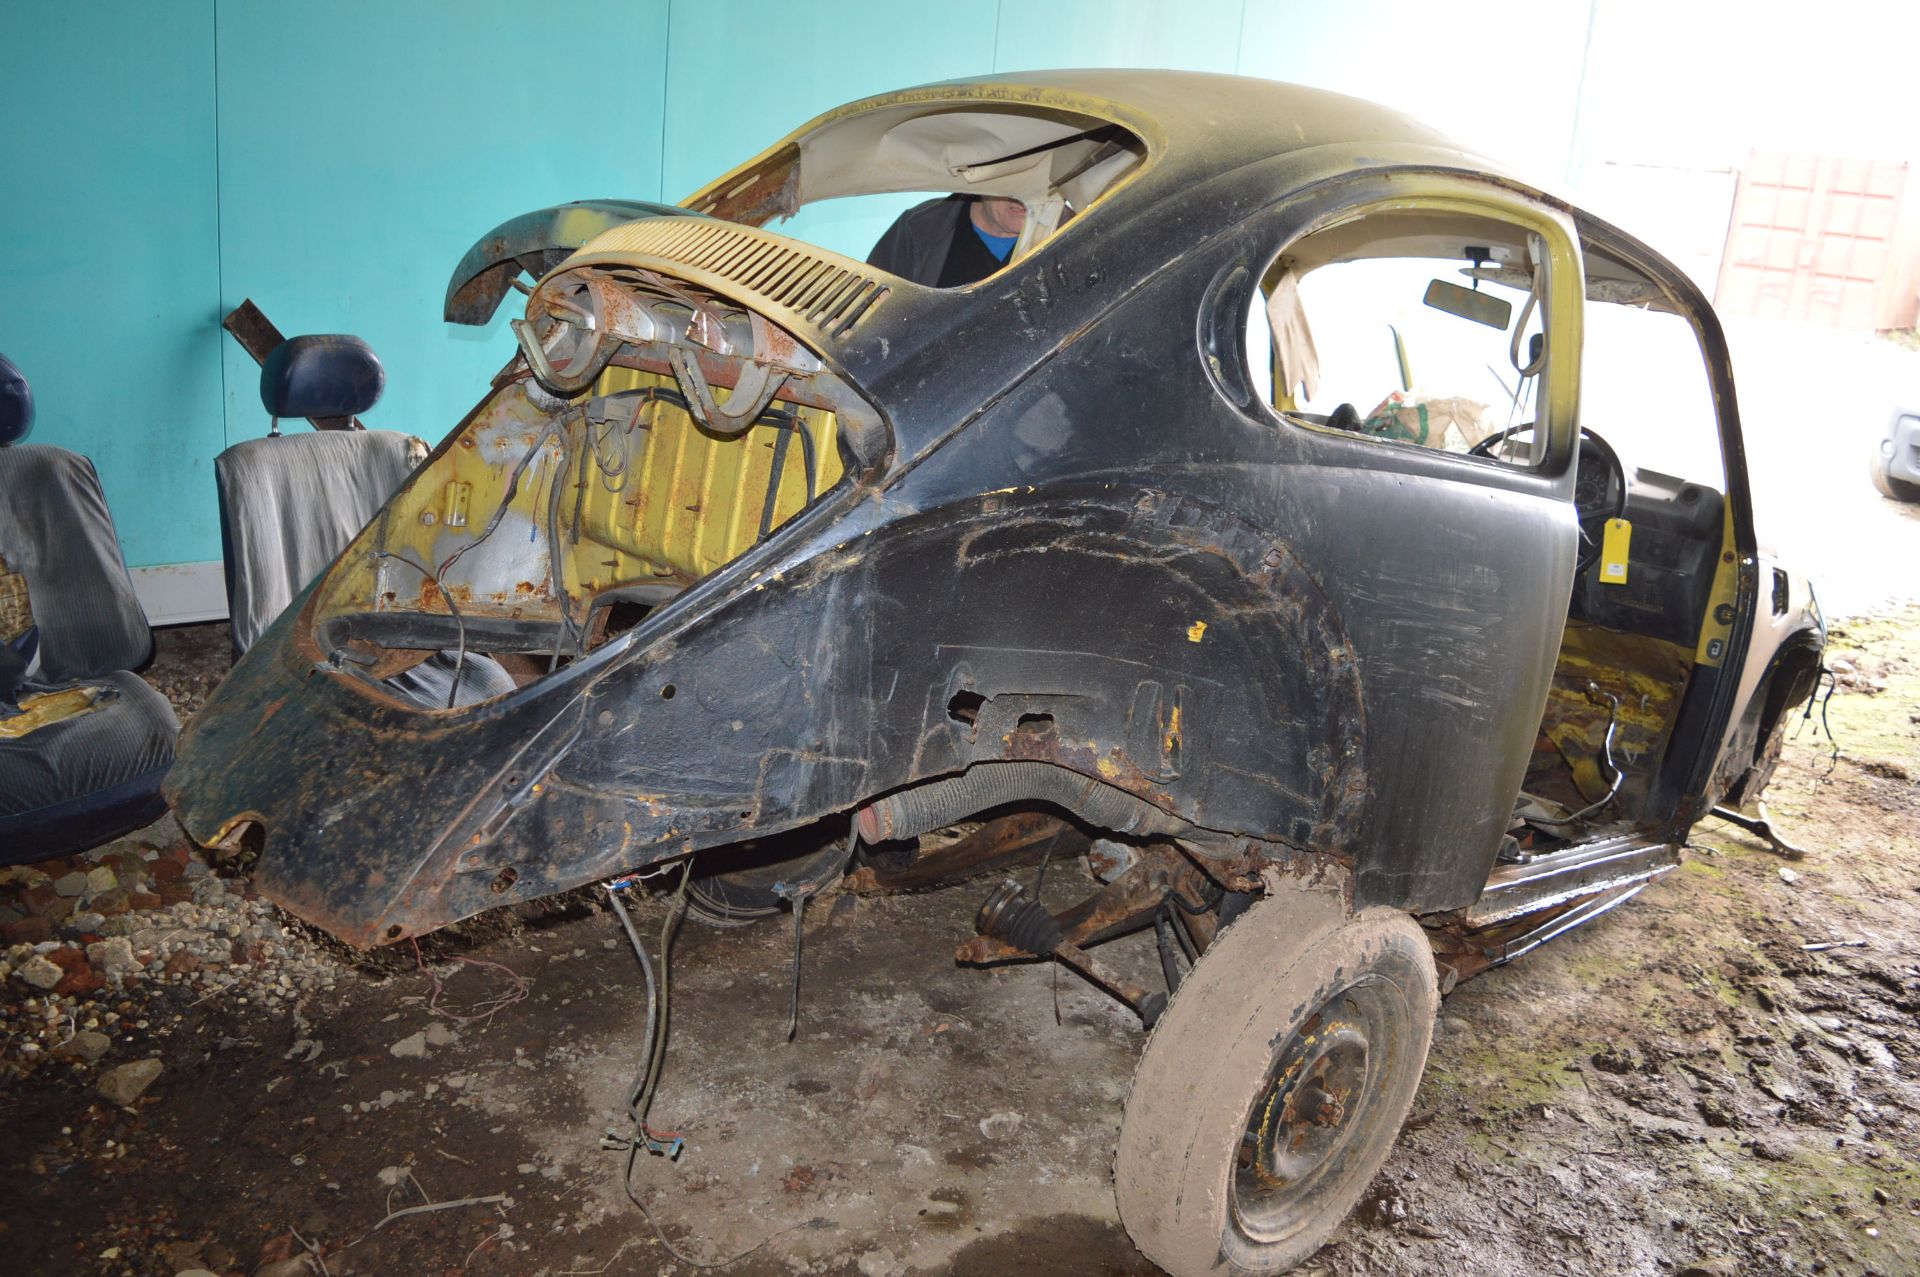 VW Beatle Body for Spares, No Engine - Image 5 of 12